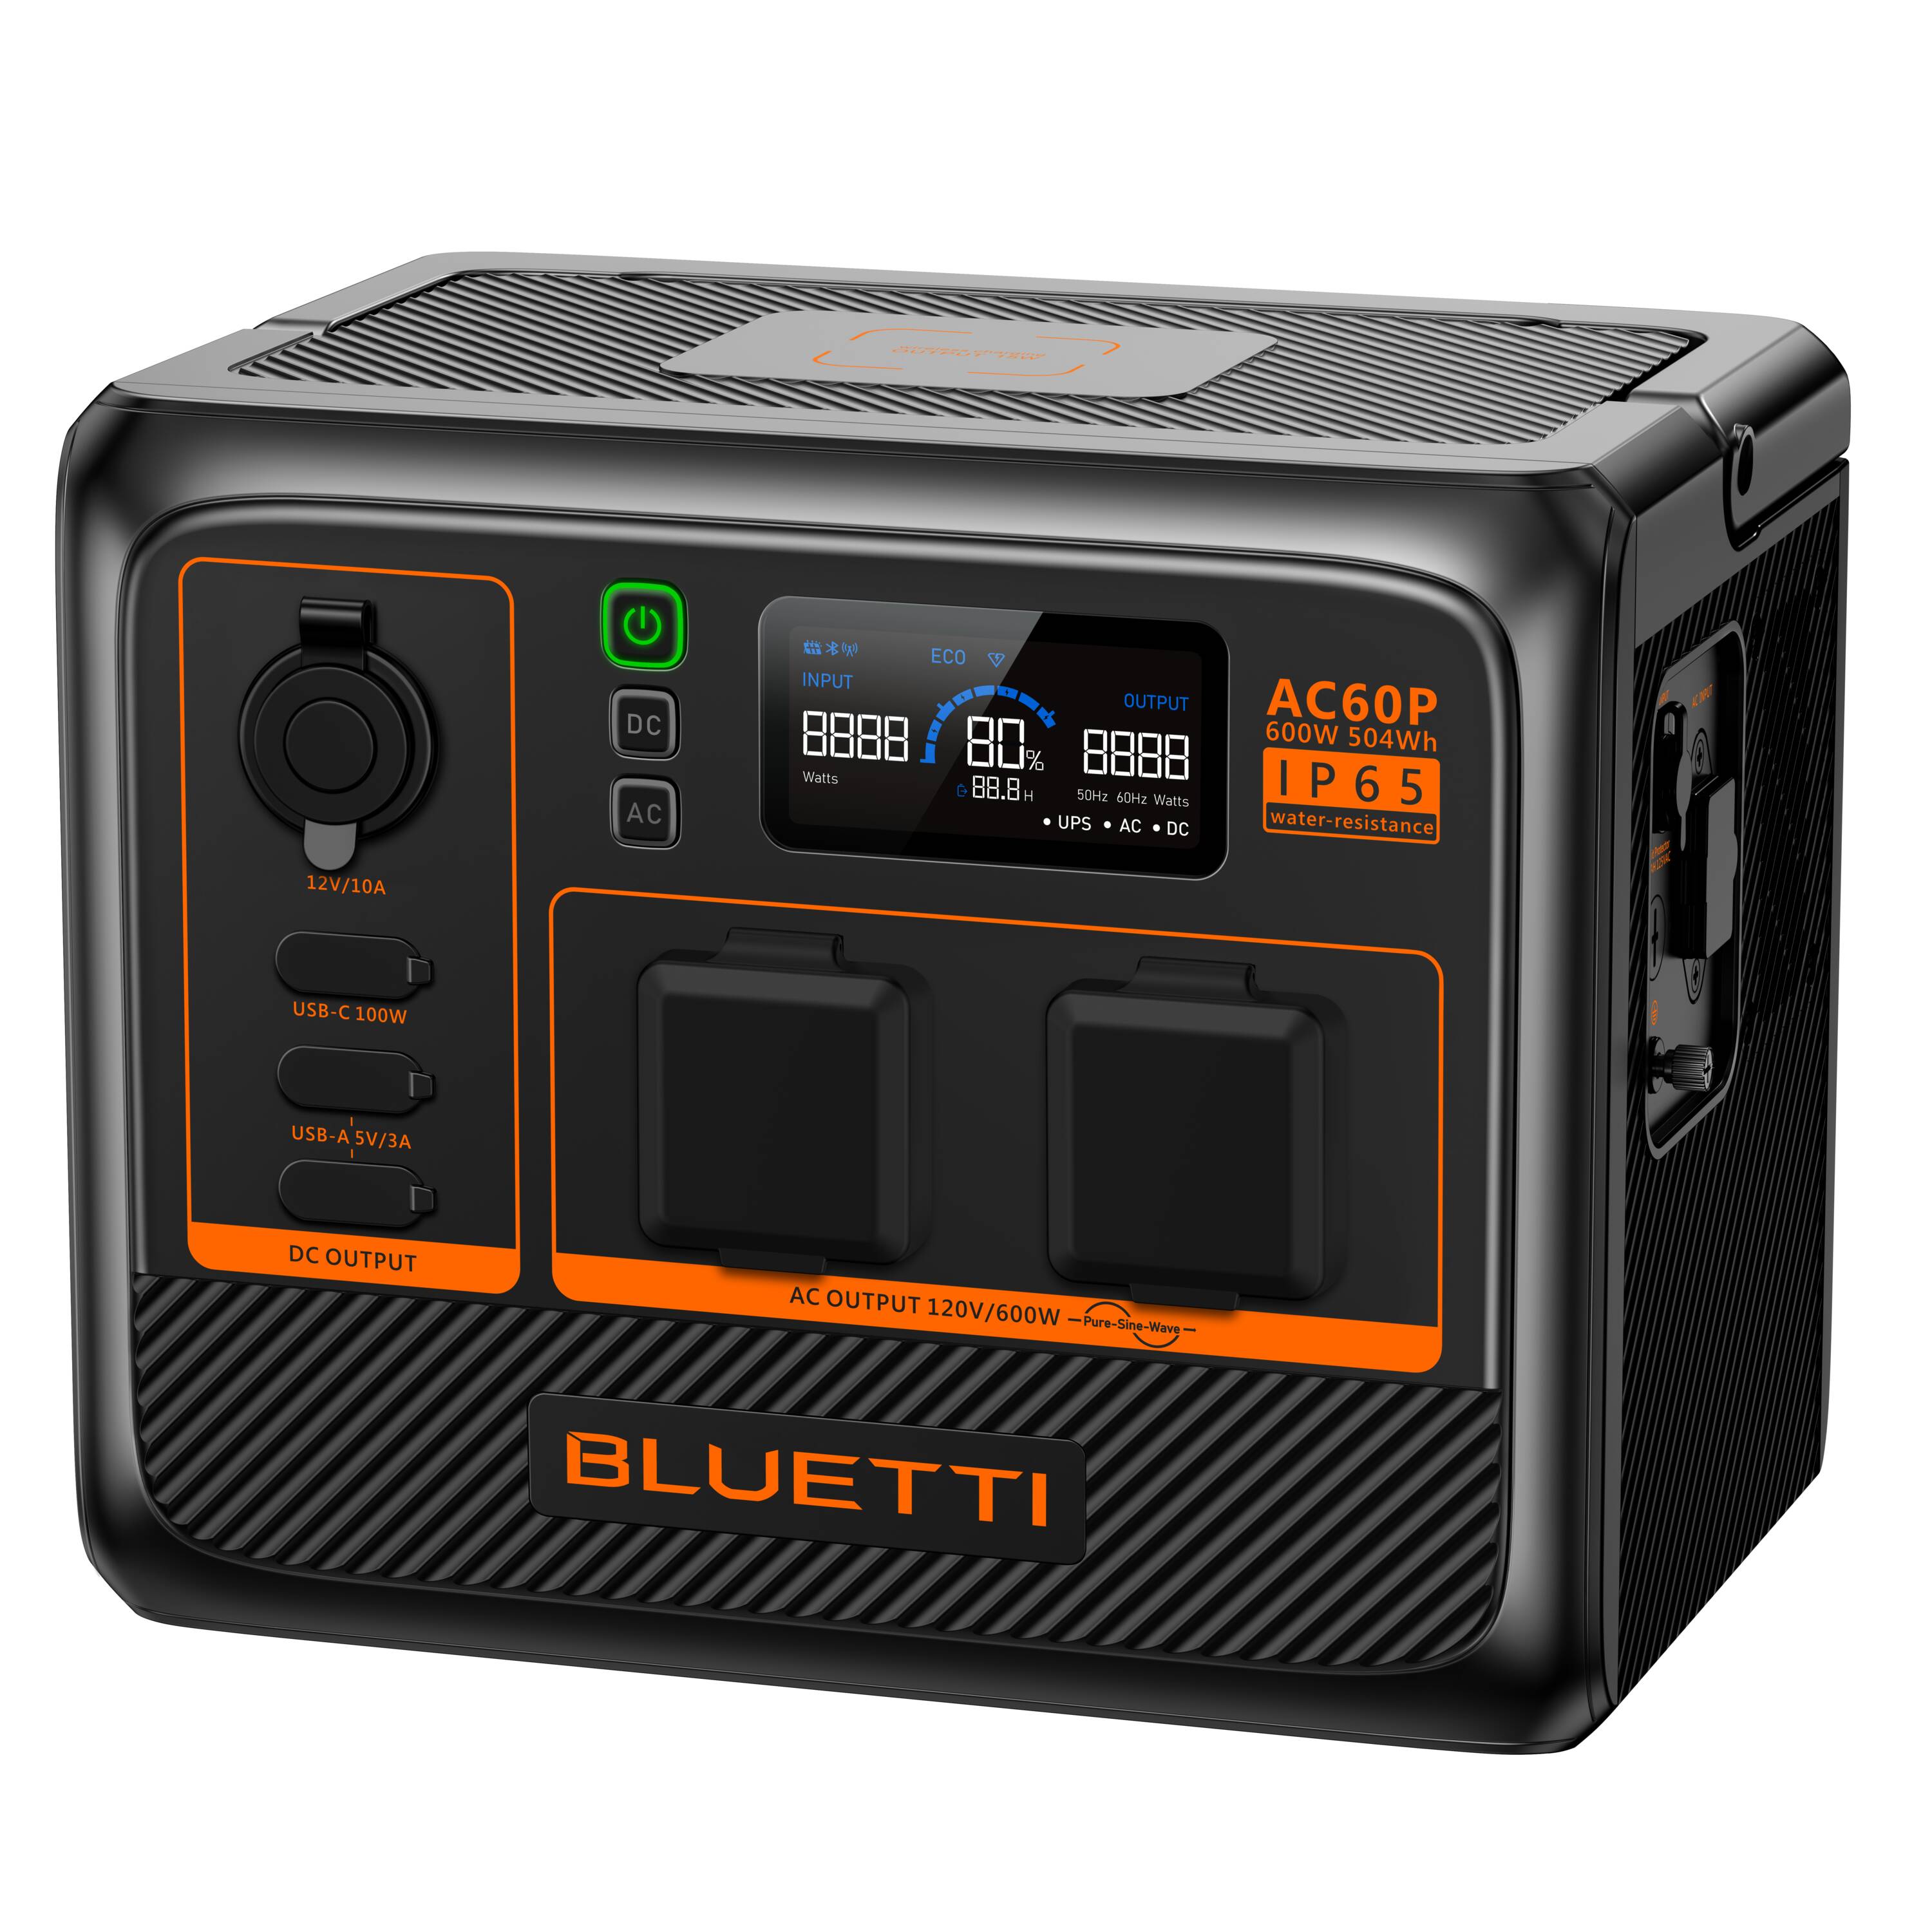 Bluetti's New Power Station Is Hot-Swappable, While Its Portable